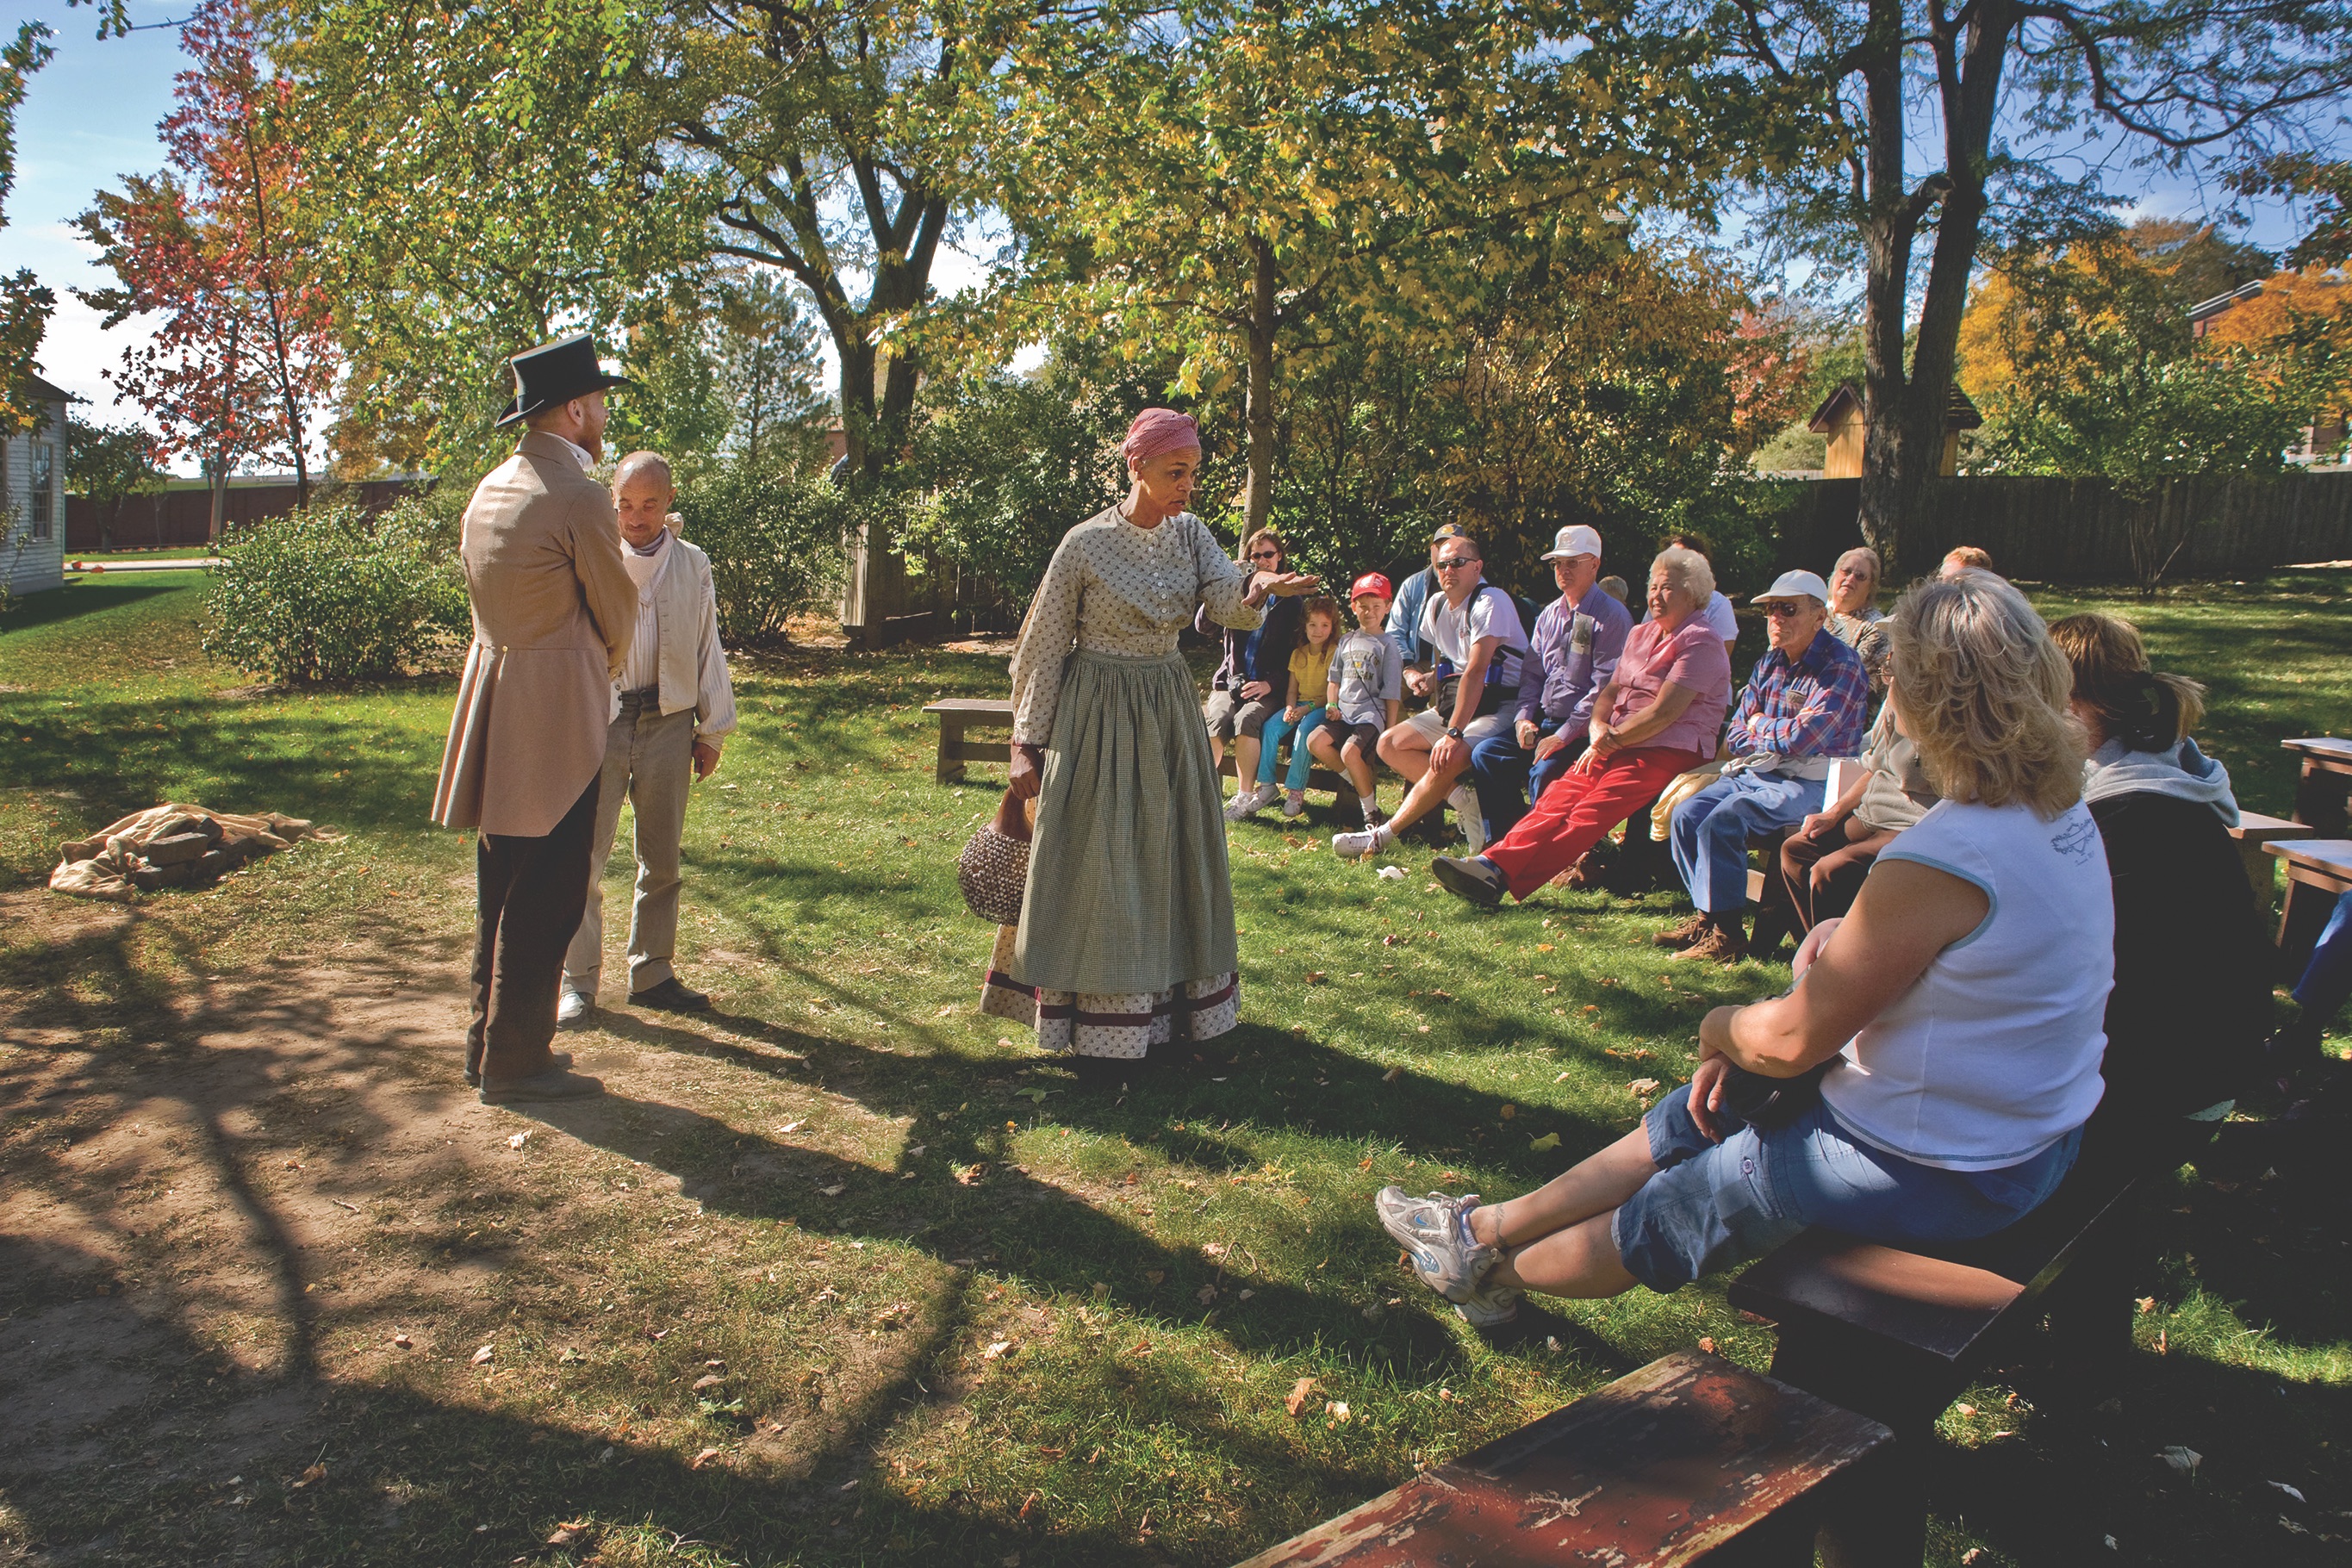 In recent years, living history has taken on a broader approach. Here, African American reenactors offer their perspective to visitors at Greenfield Village in Dearborn, Mich., the country’s “largest outdoor museum.” (Marmaduke St. John/Alamy Stock Photo)